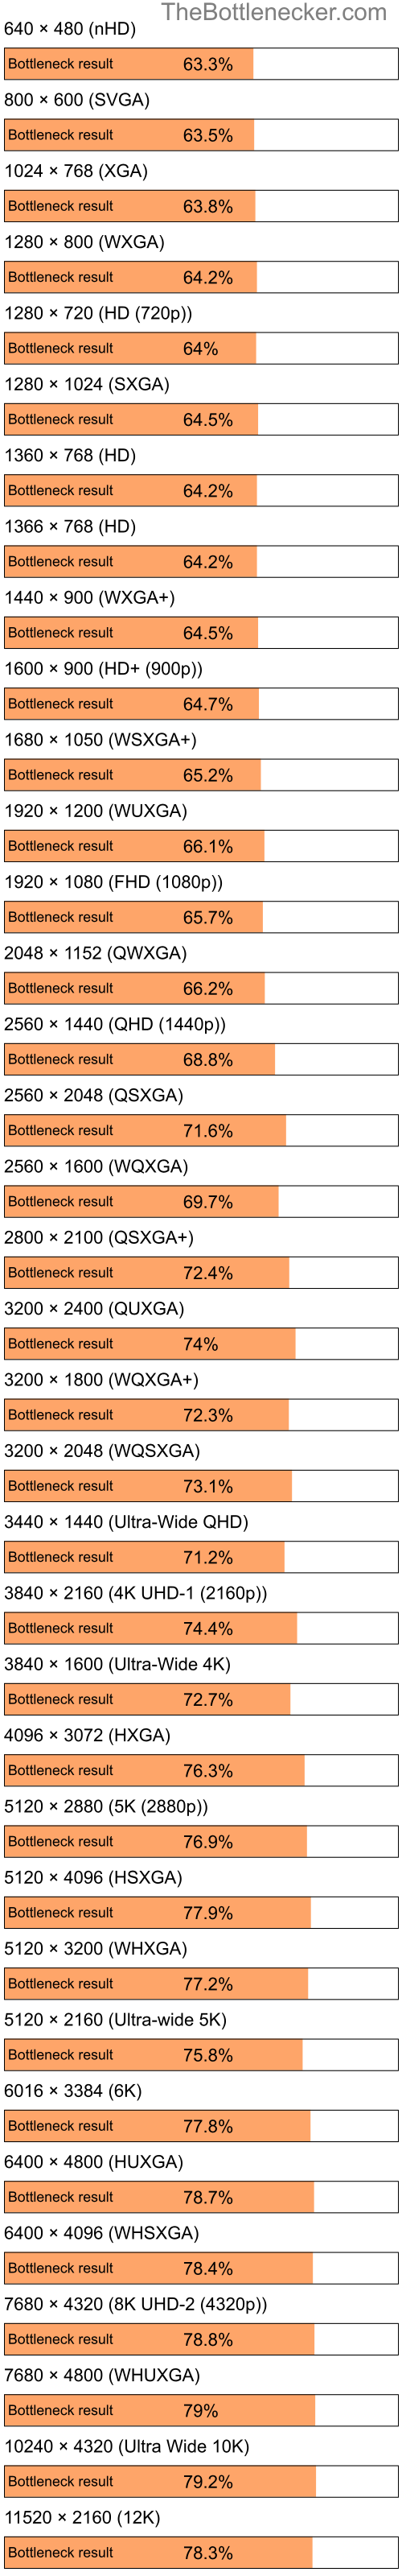 Bottleneck results by resolution for Intel Celeron M 410 and AMD M880G with Mobility Radeon HD 4200 in General Tasks